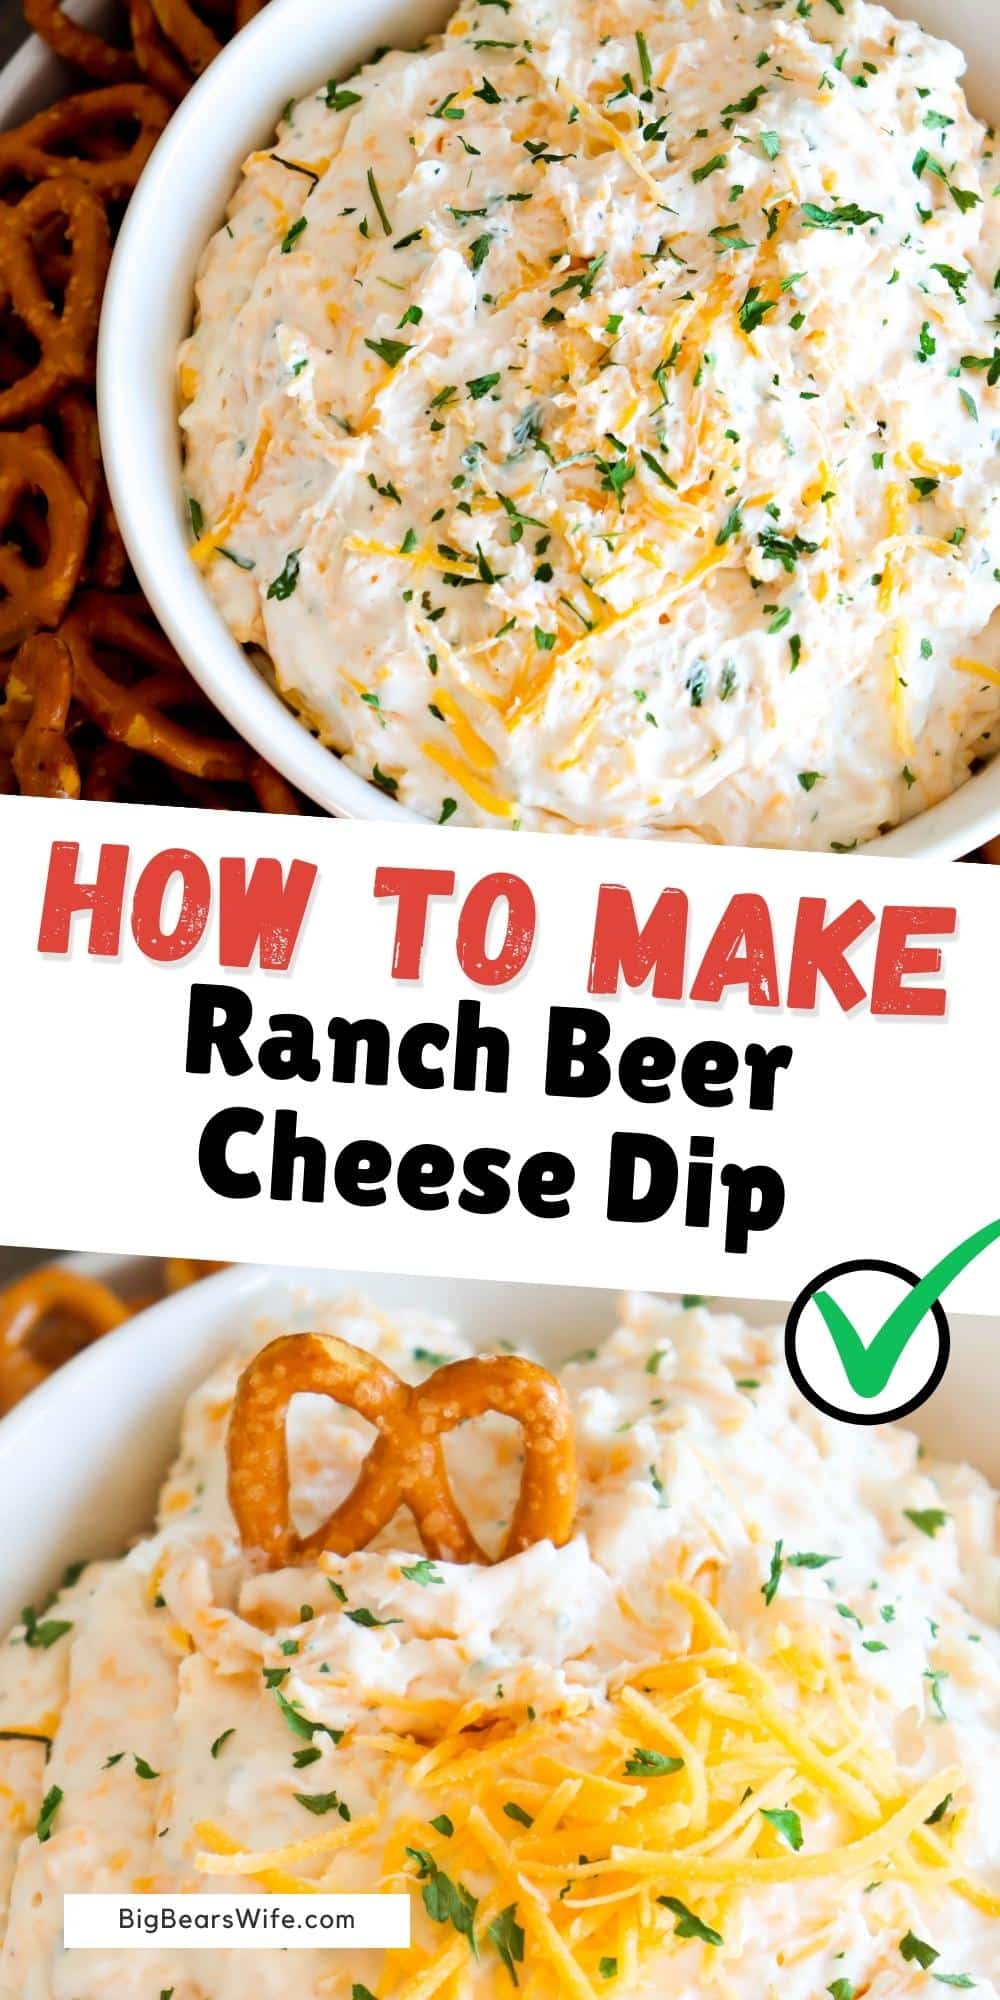 Ranch Beer Cheese Dip is a crazy easy dip recipe that'll be a hit at your next party, tailgate or game day get together! Cream cheese, ranch seasoning, cheese and beer! 4 ingredients and a bit of mixing is all you're going to need for this party dip! via @bigbearswife